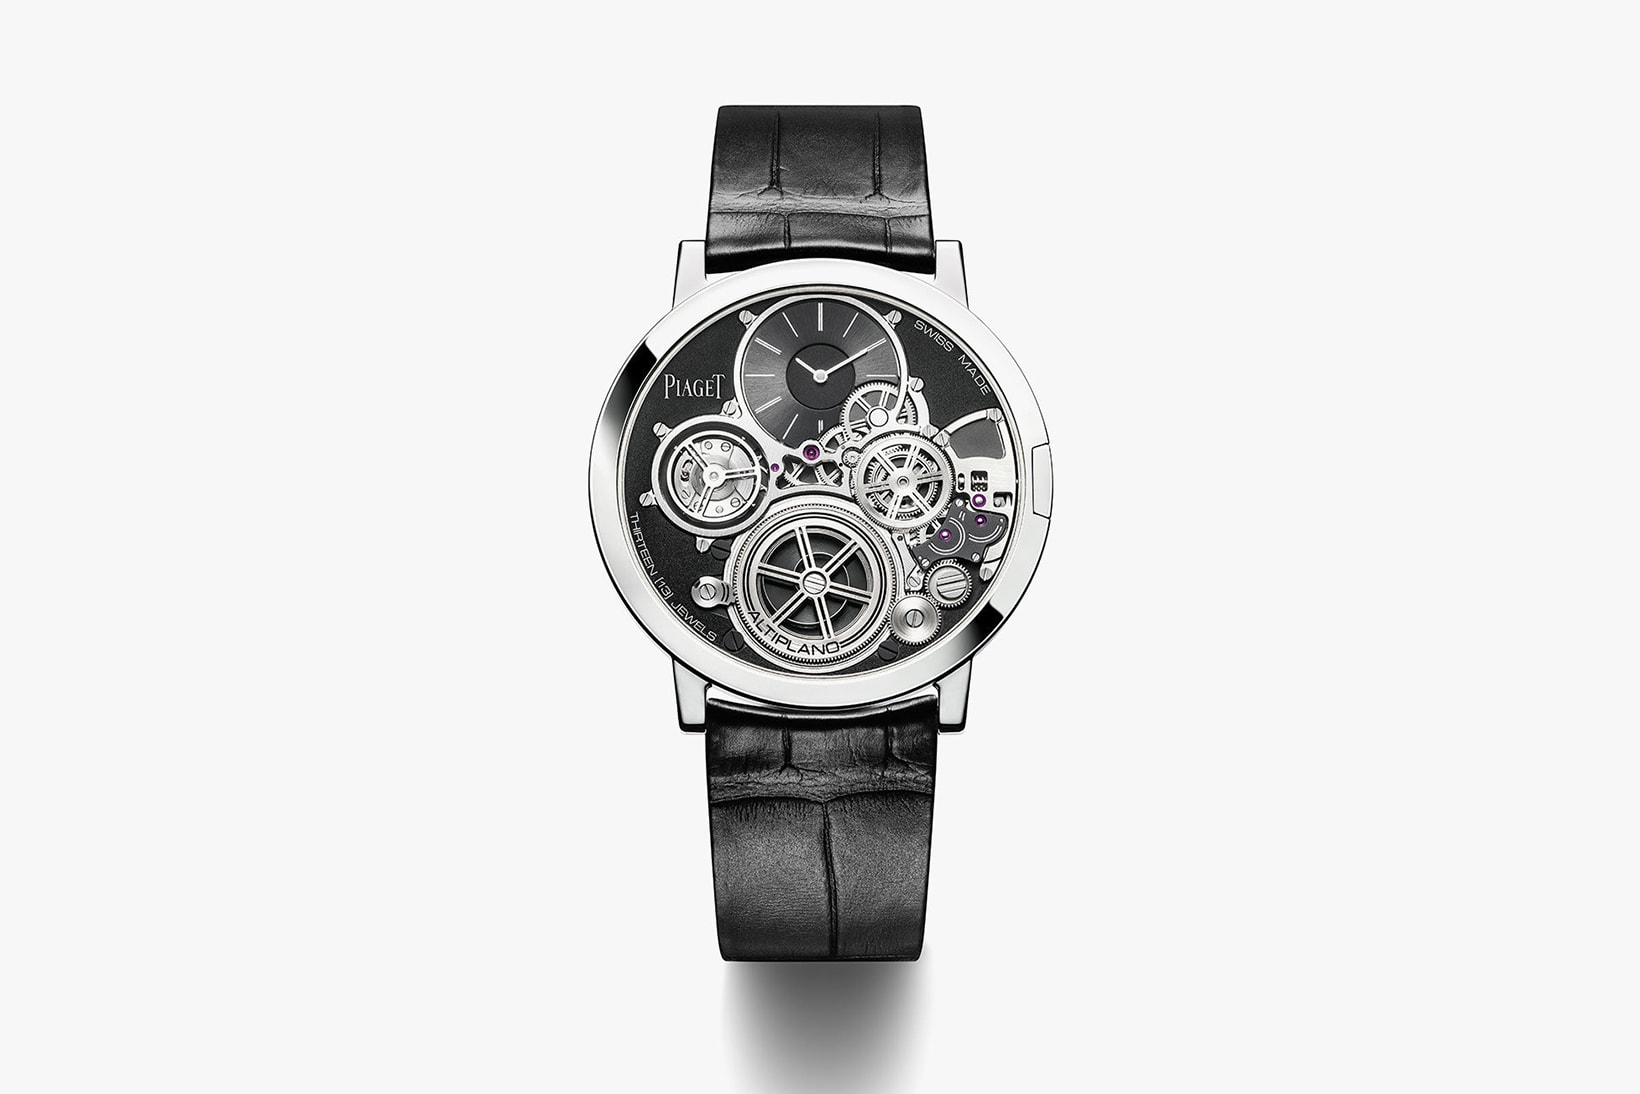 Piaget Altiplano Ultimate Concept Thinnest Mechanical Watch Ever